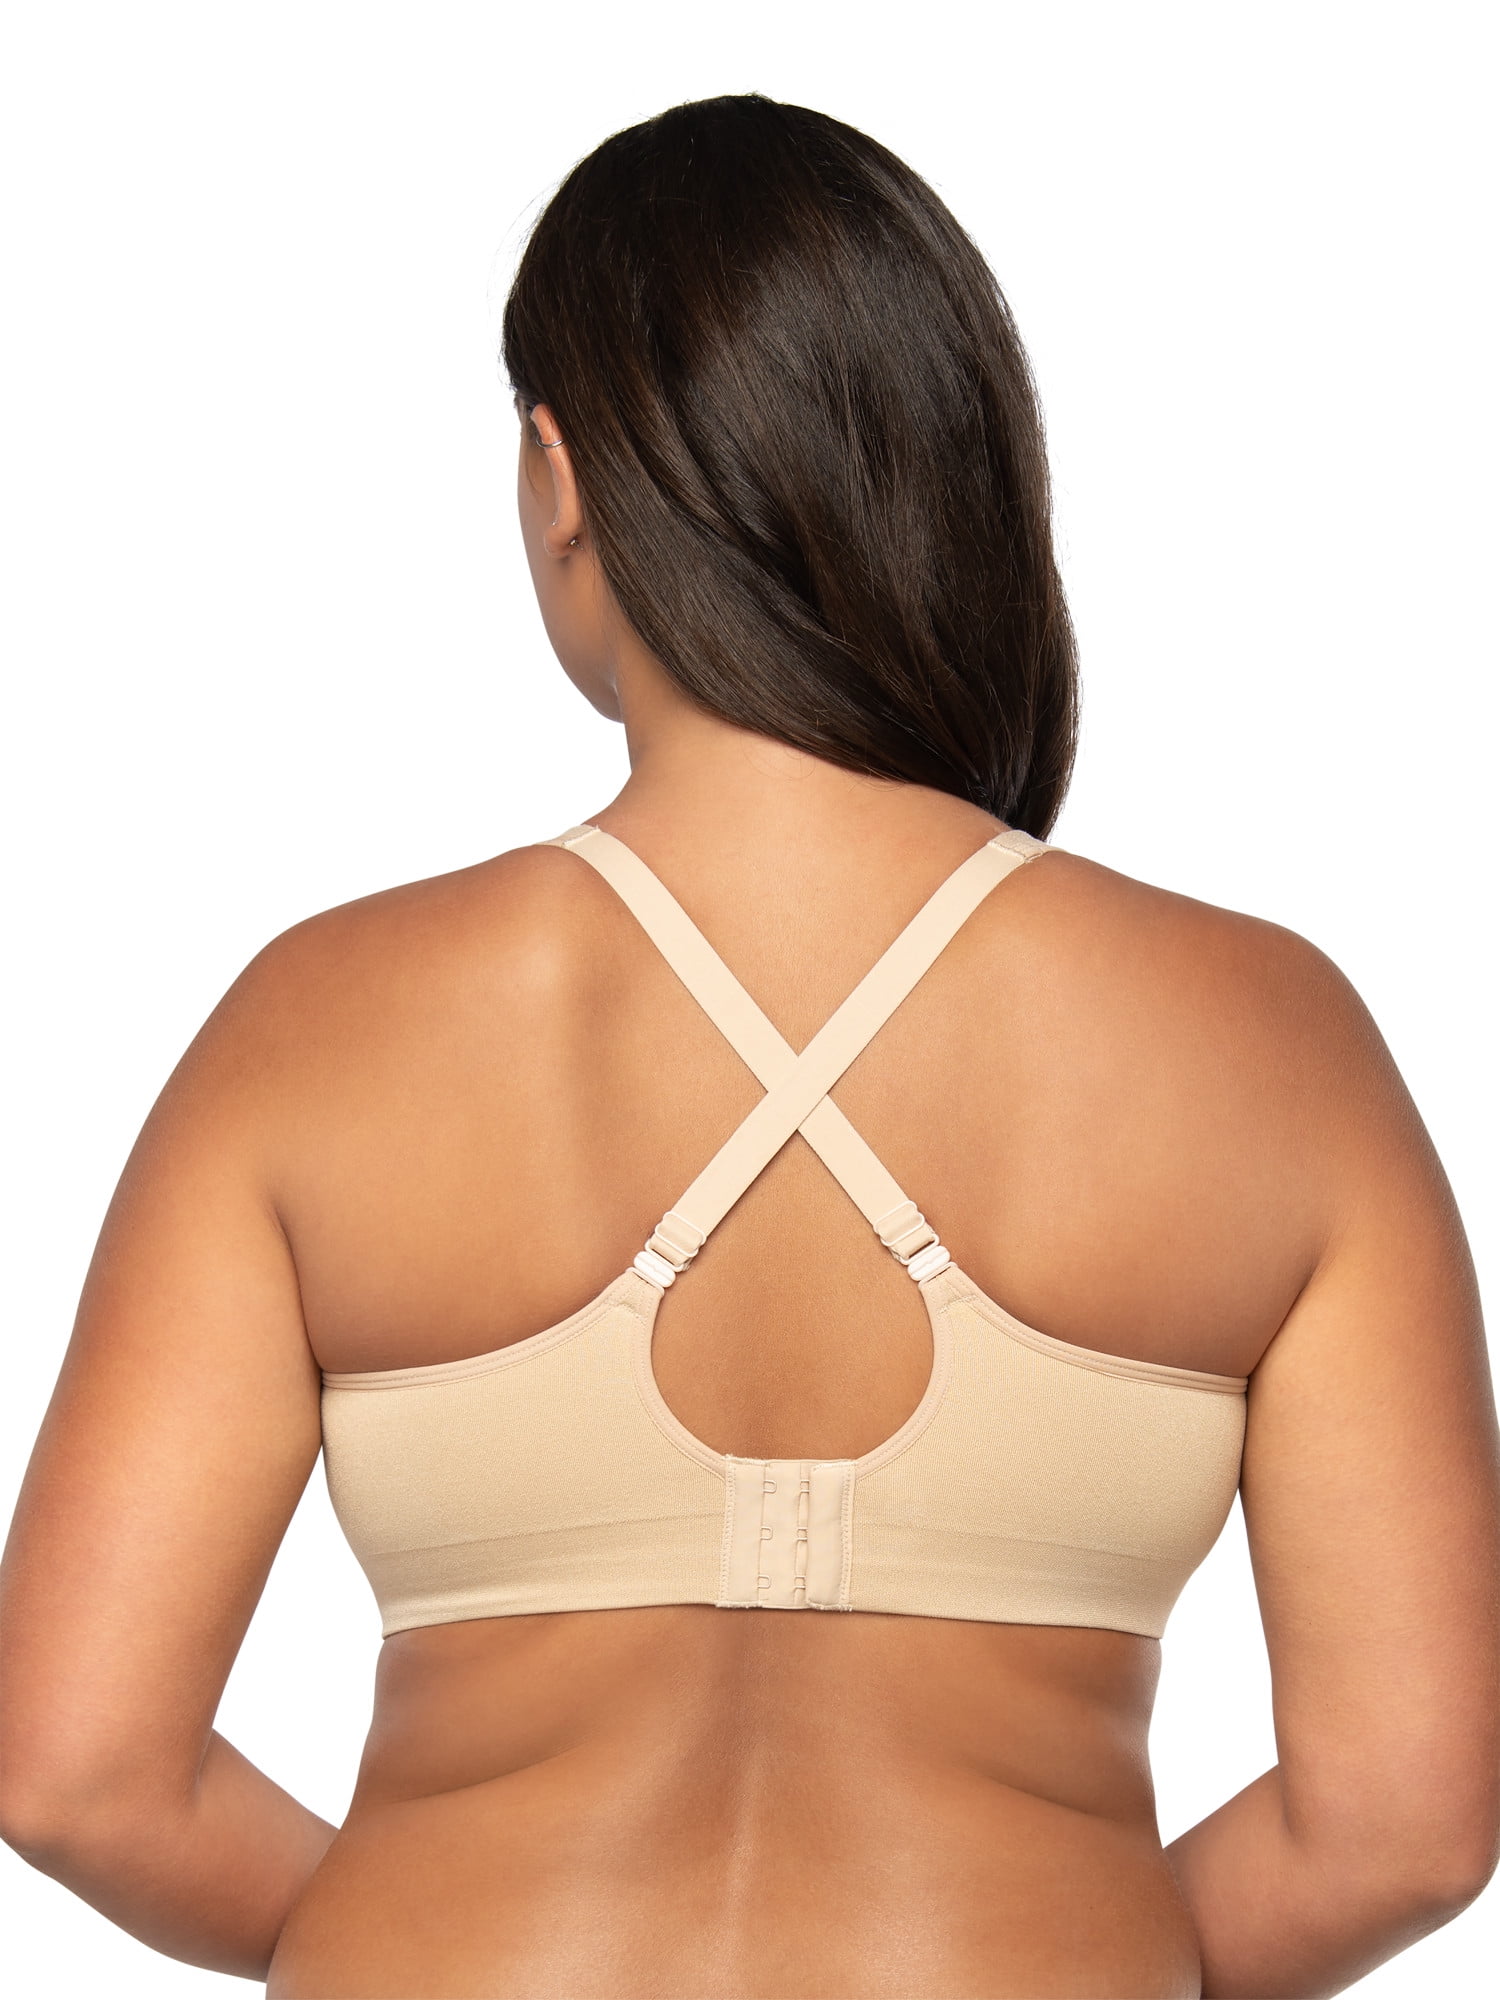 FITWELL INTIMATES Trademark Application of MRC Creations, LLC - Serial  Number 90413797 :: Justia Trademarks